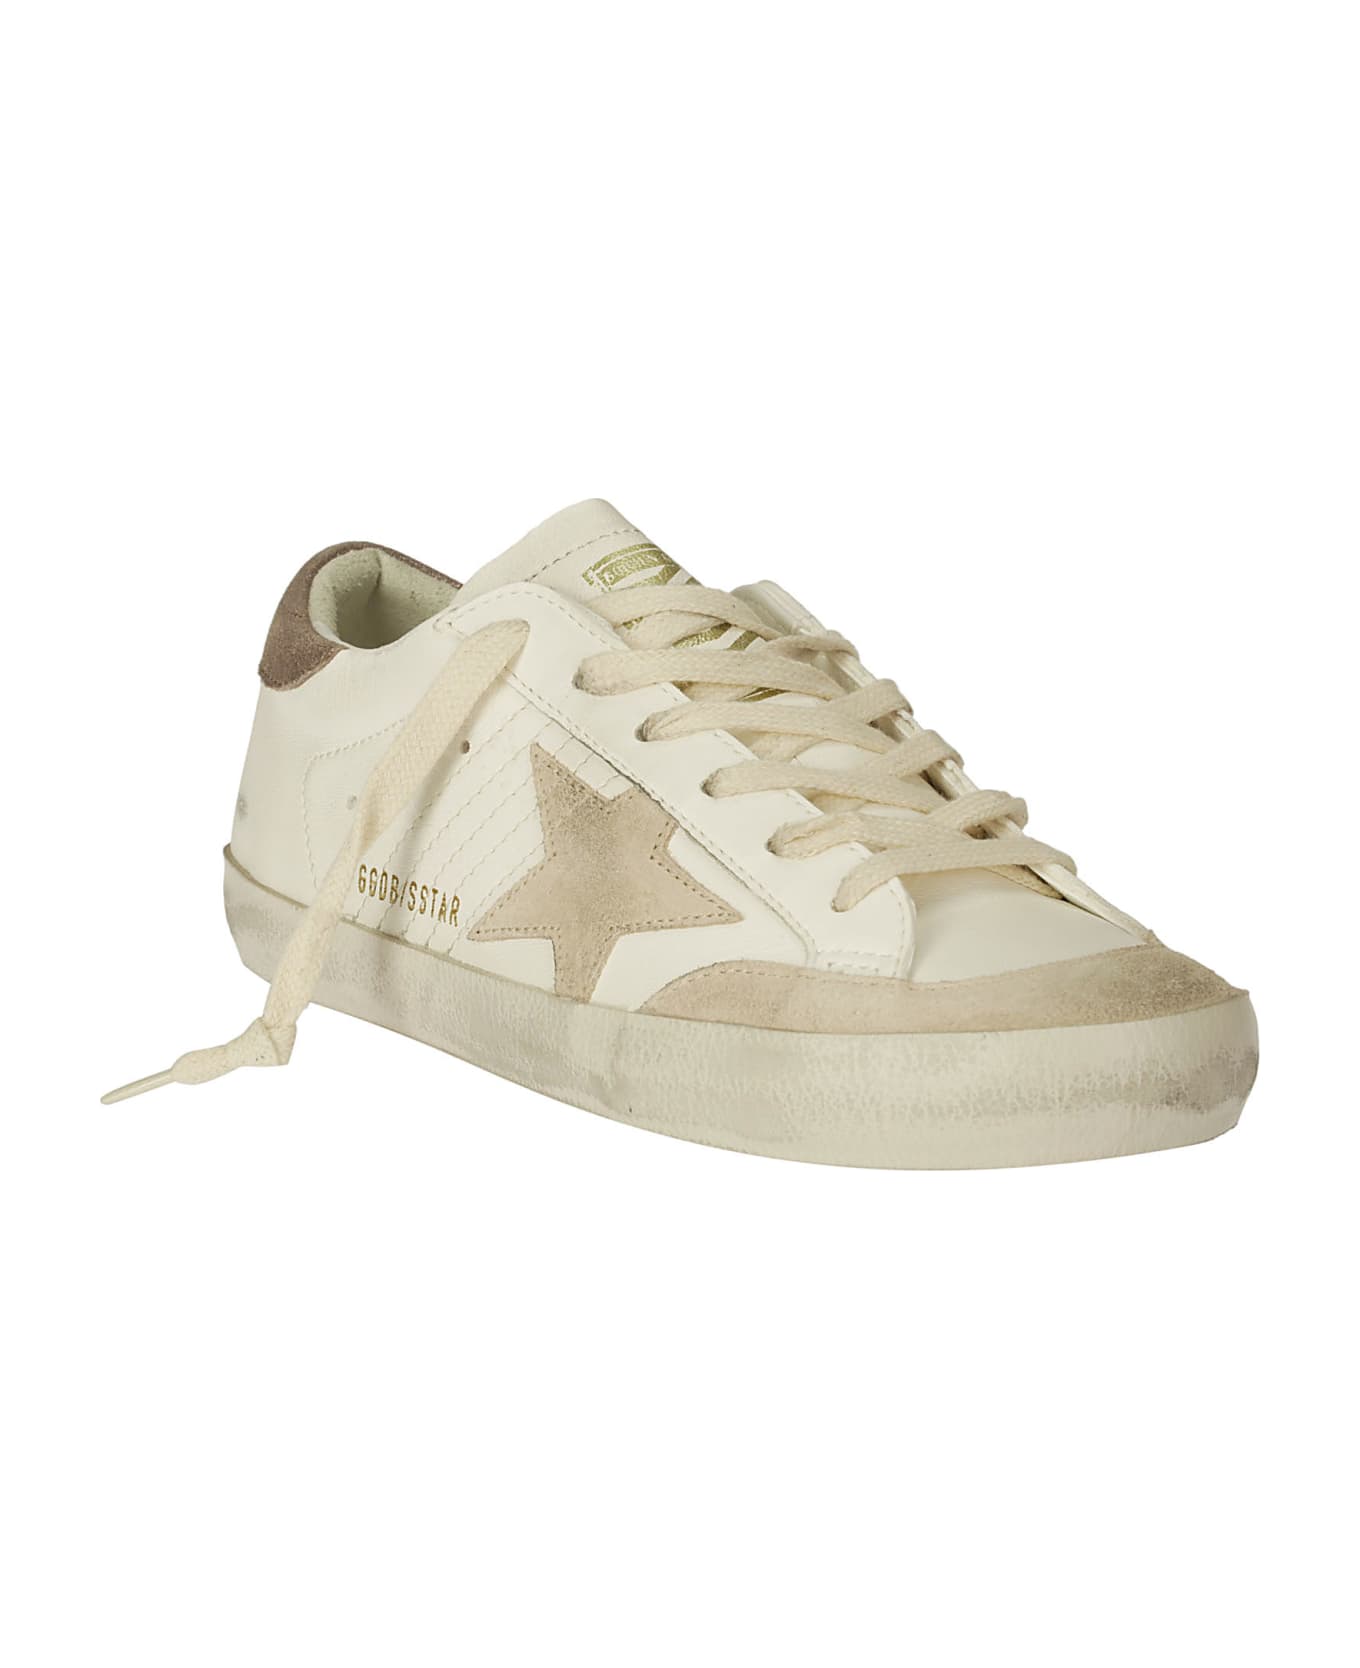 Golden Goose Super Star Lace-up Sneakers - WHITE/BEIGE/LIGHT BROWN